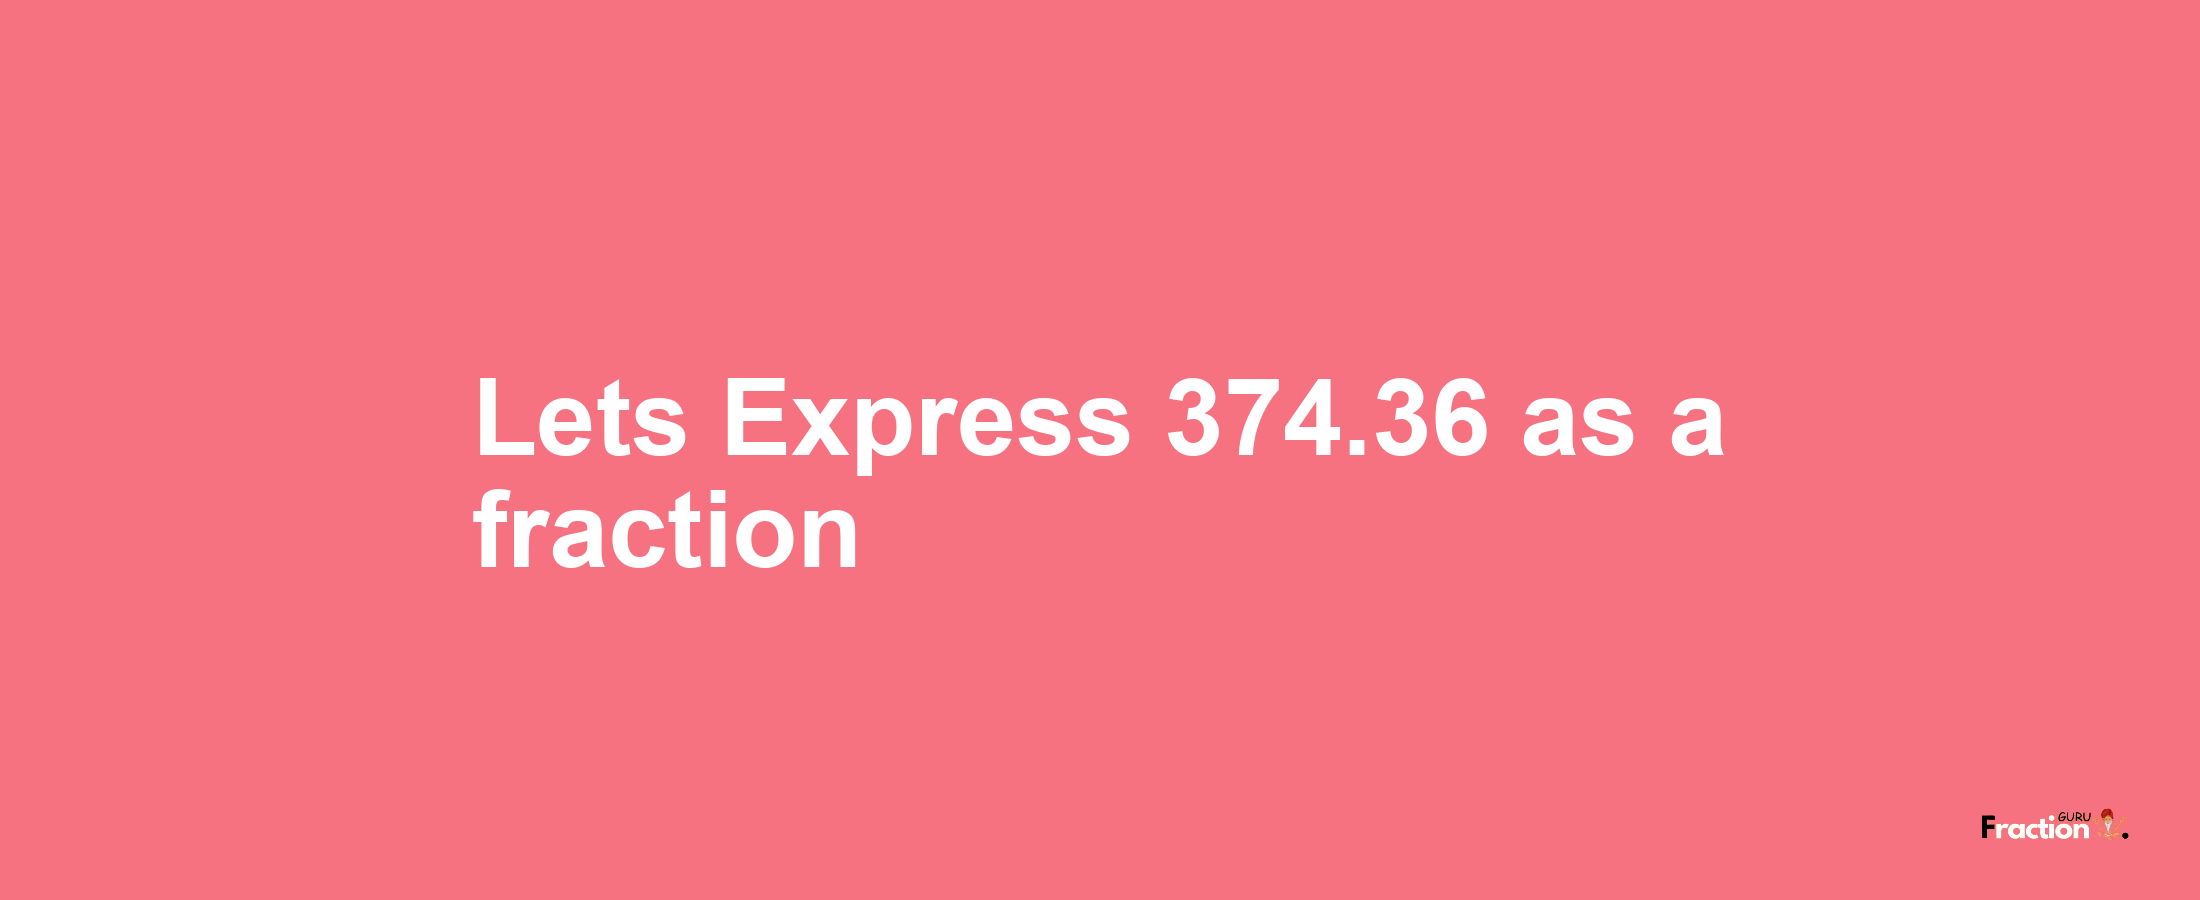 Lets Express 374.36 as afraction